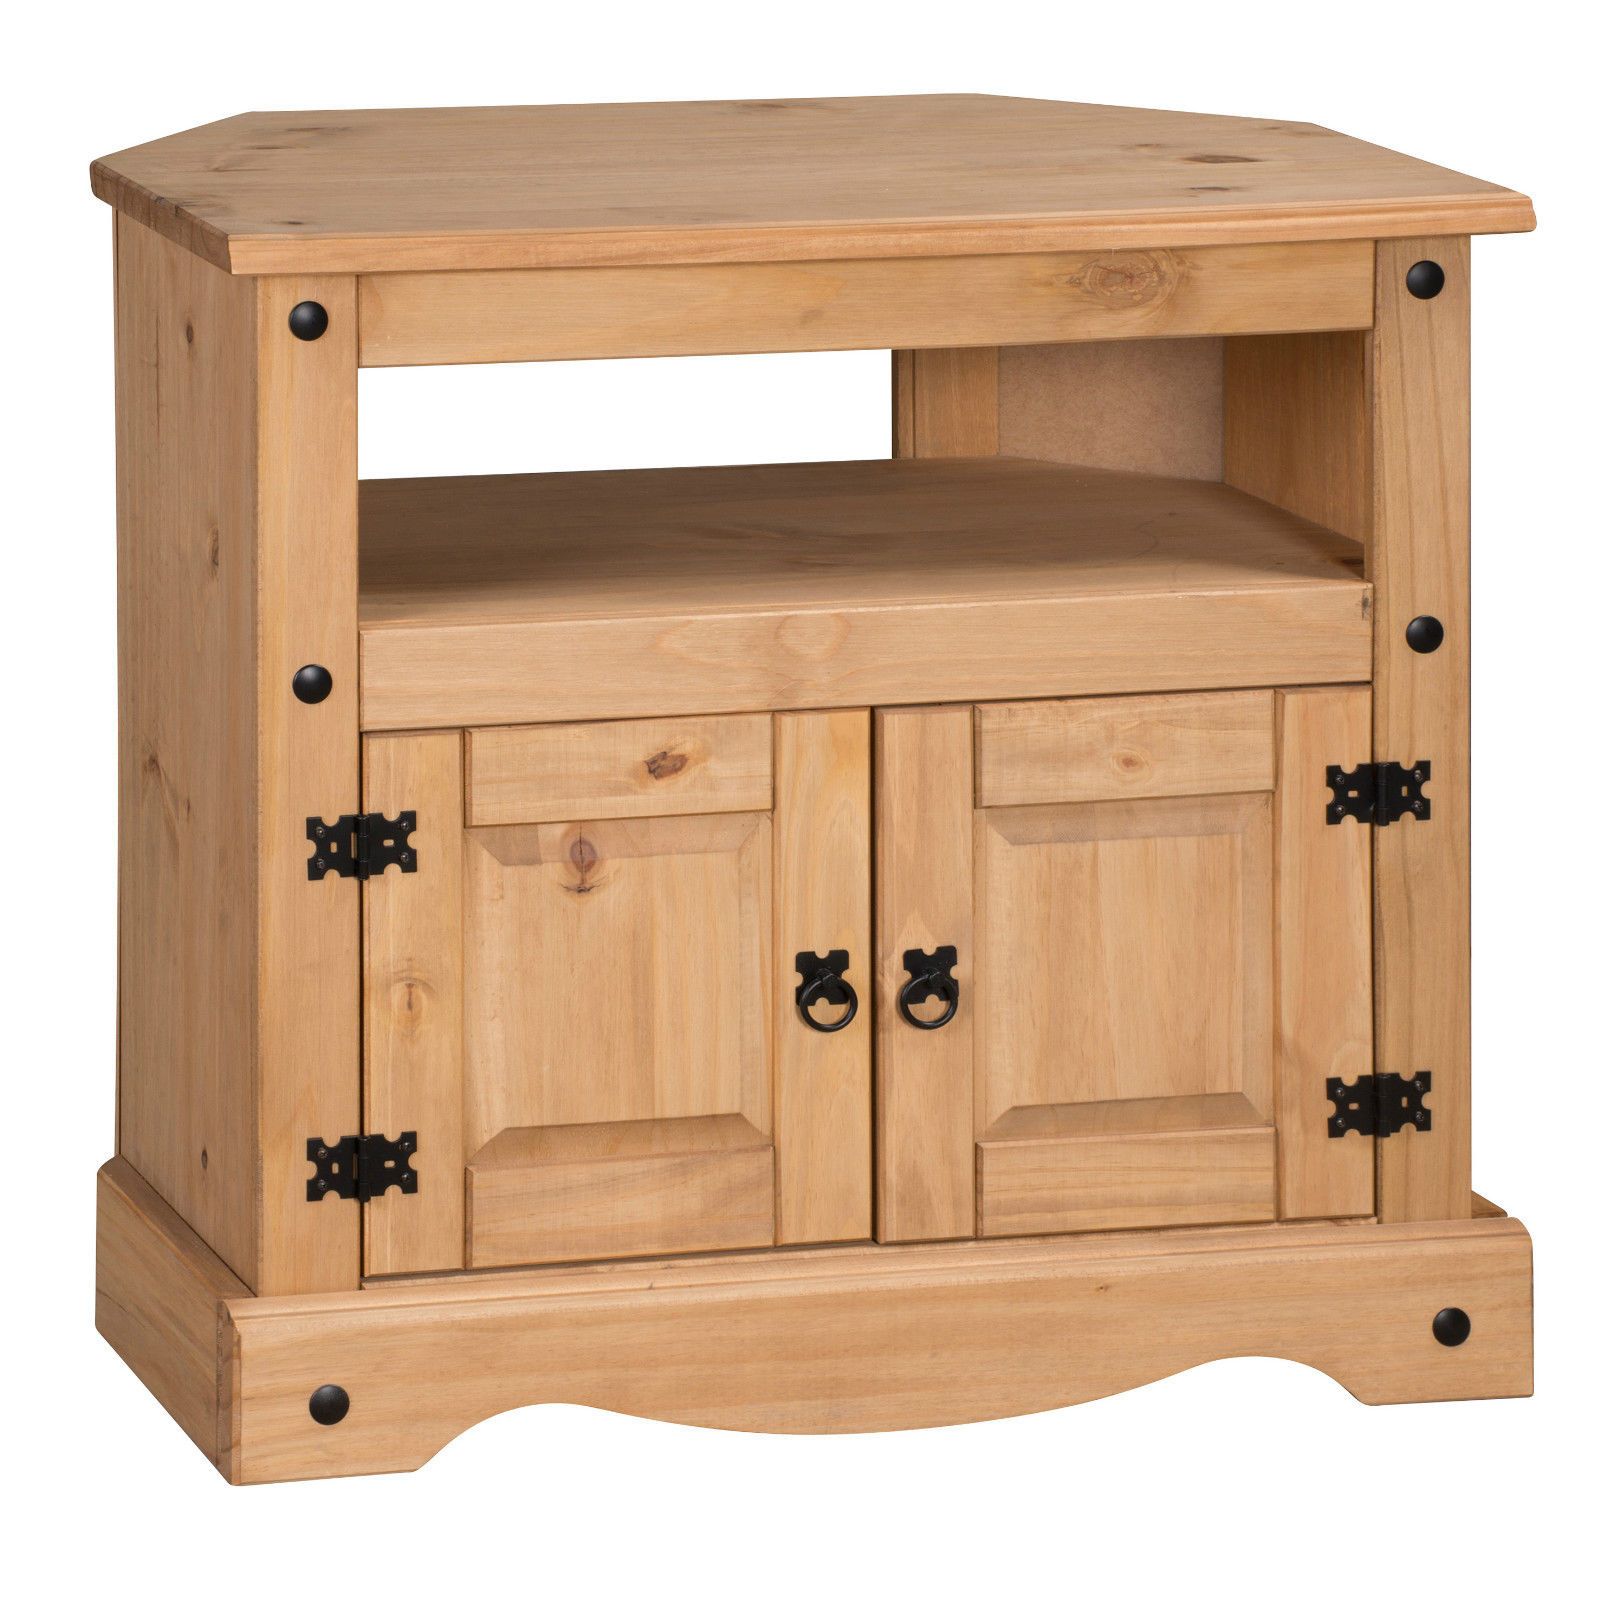 H4home Rustic Corner Tv Stand Solid Wood | H4home Furnitures Pertaining To Oak Corner Tv Stands (View 11 of 28)